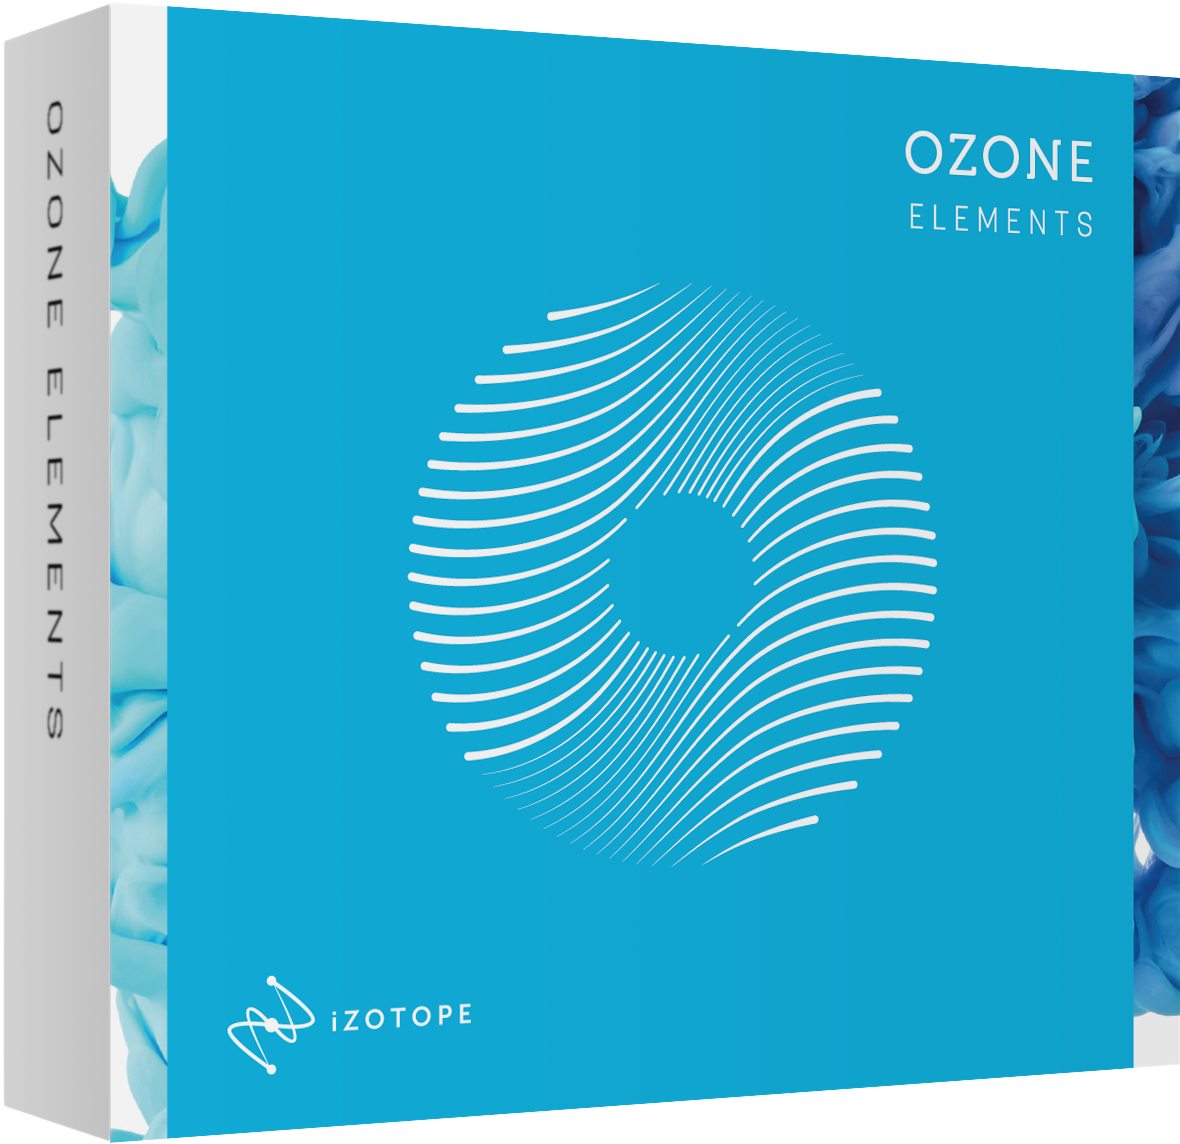 Download izotope ozone 4 full version hacked mode